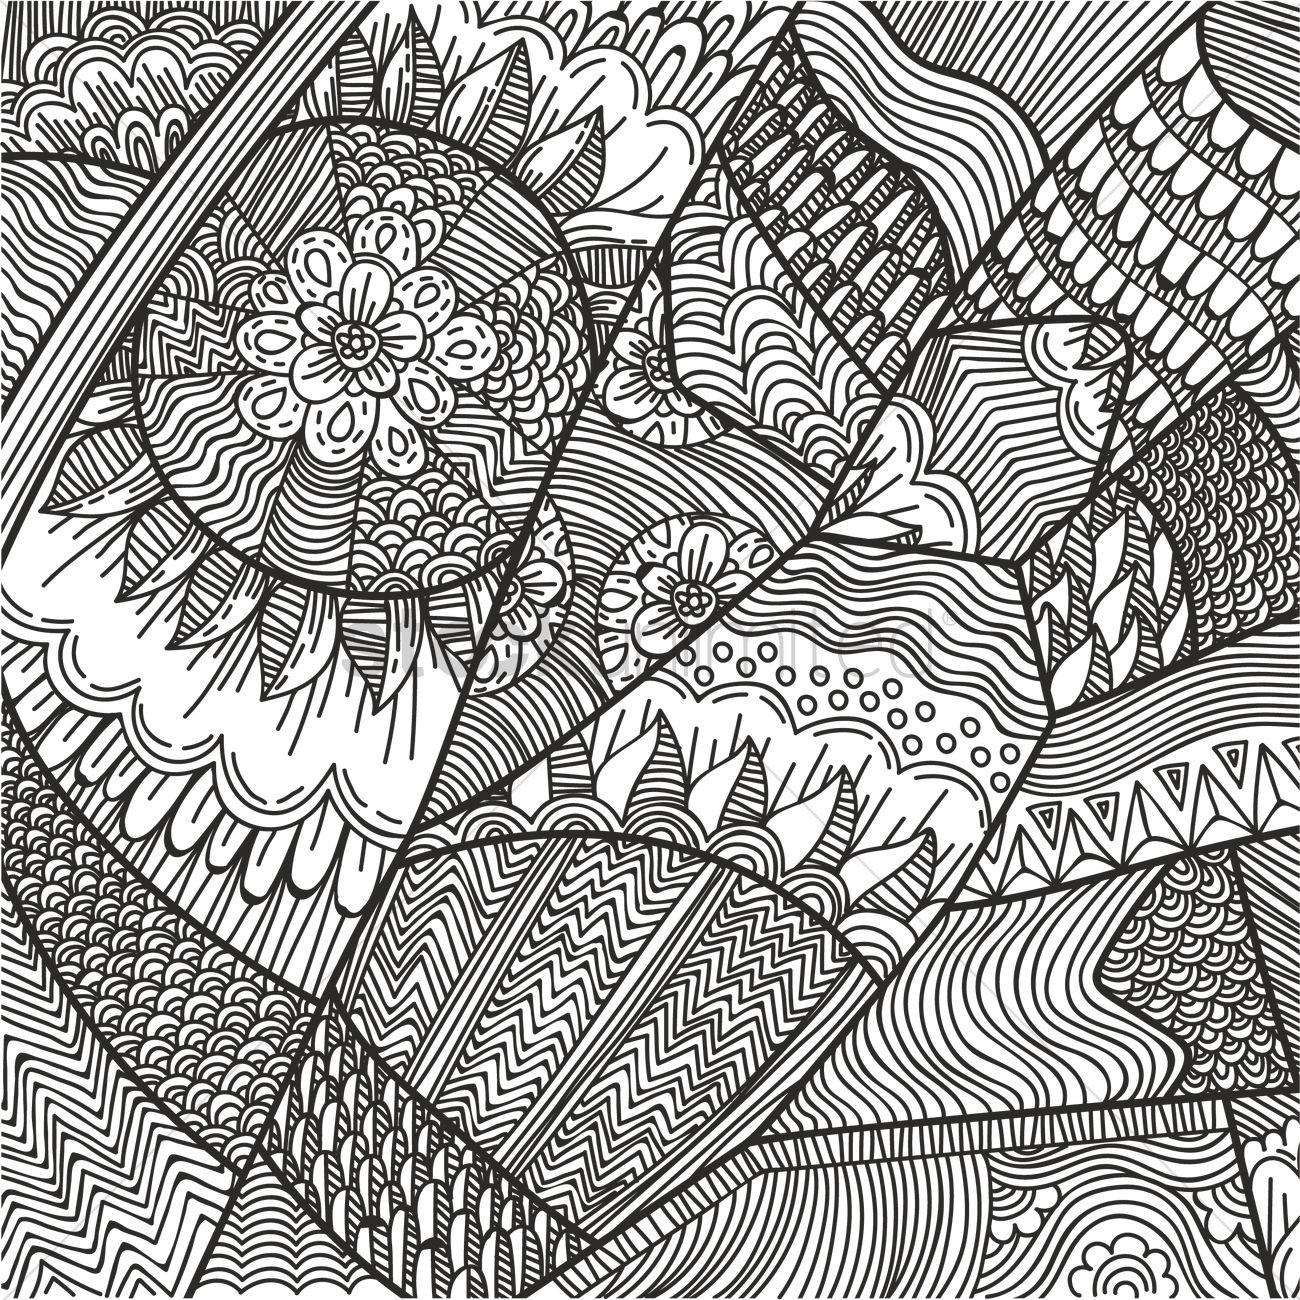 Pattern Design Drawing at PaintingValley.com | Explore collection of ...